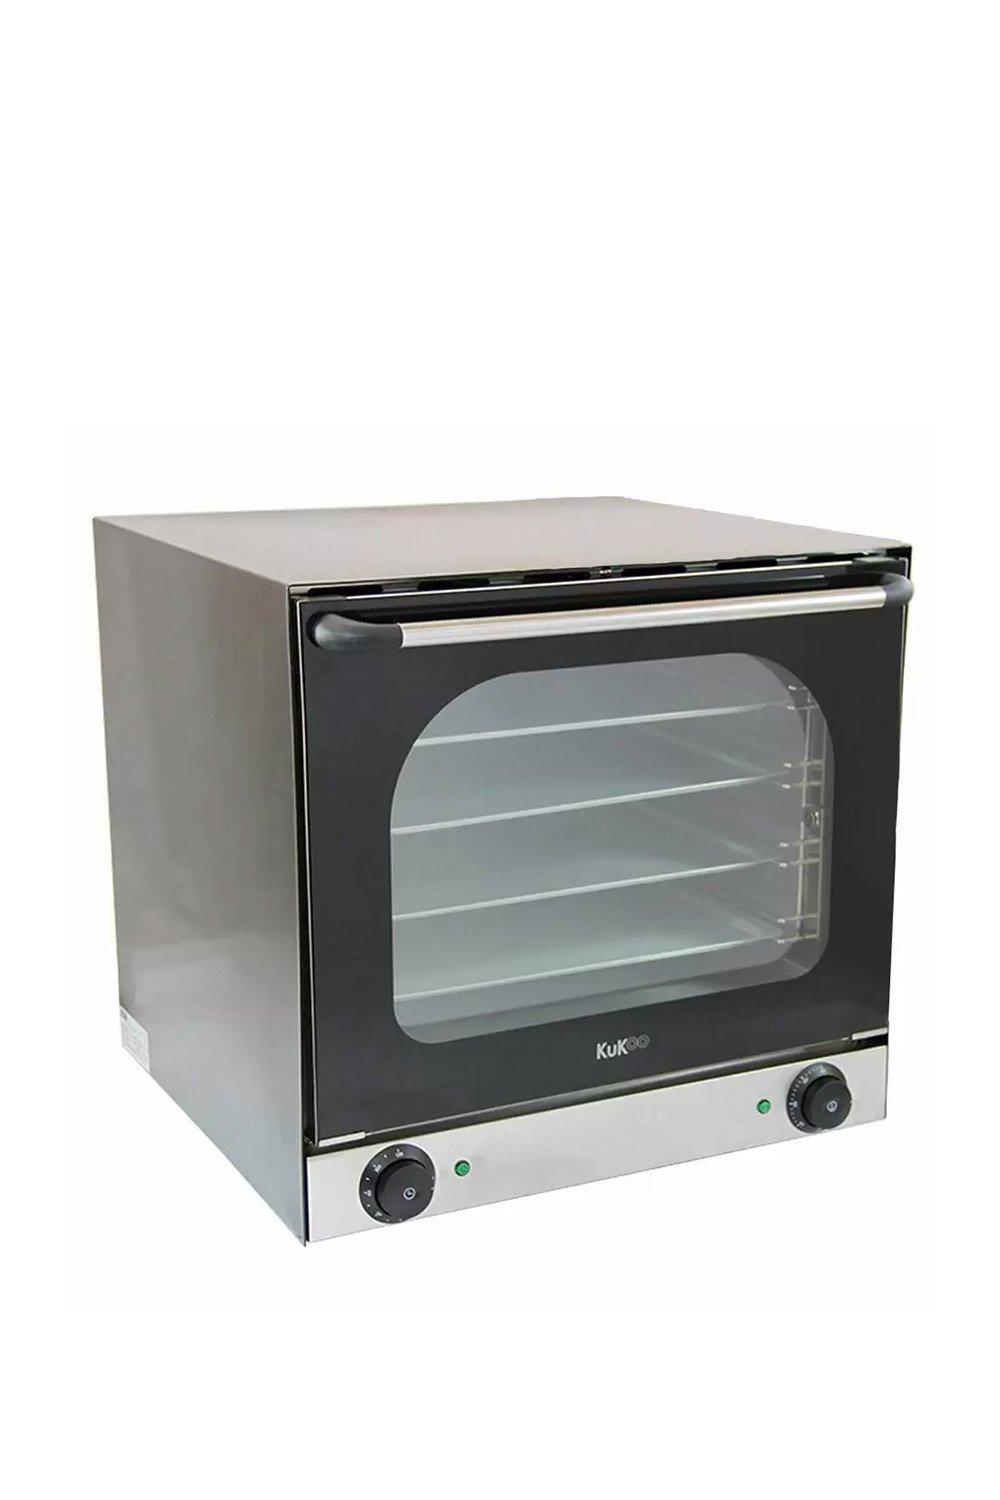 60cm Wide Convection Baking Oven